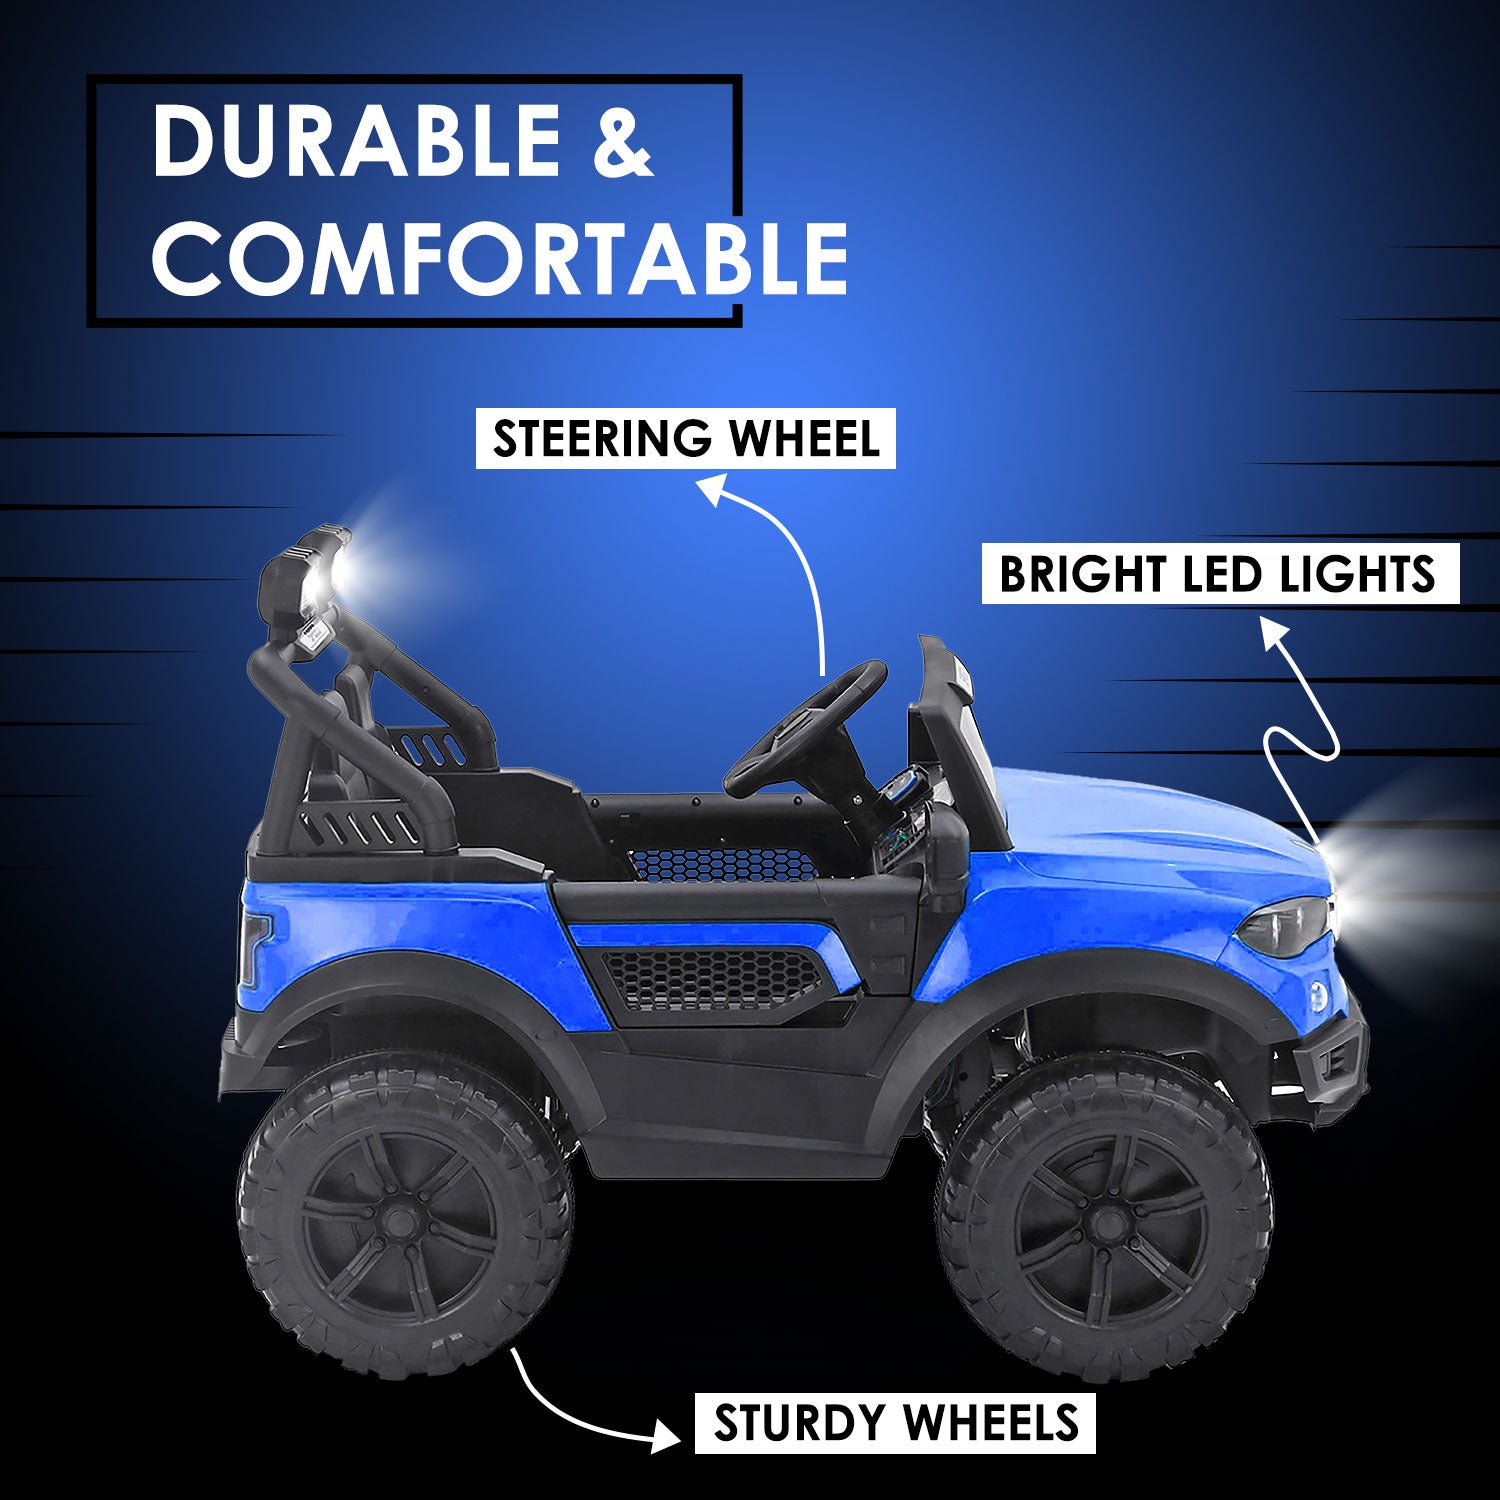 Baby Moo Ford 4X4 Battery Operated Electric Ride On Jeep Rechargeable 12V Battery With Remote Control LED Lights, Music & USB Port - Blue